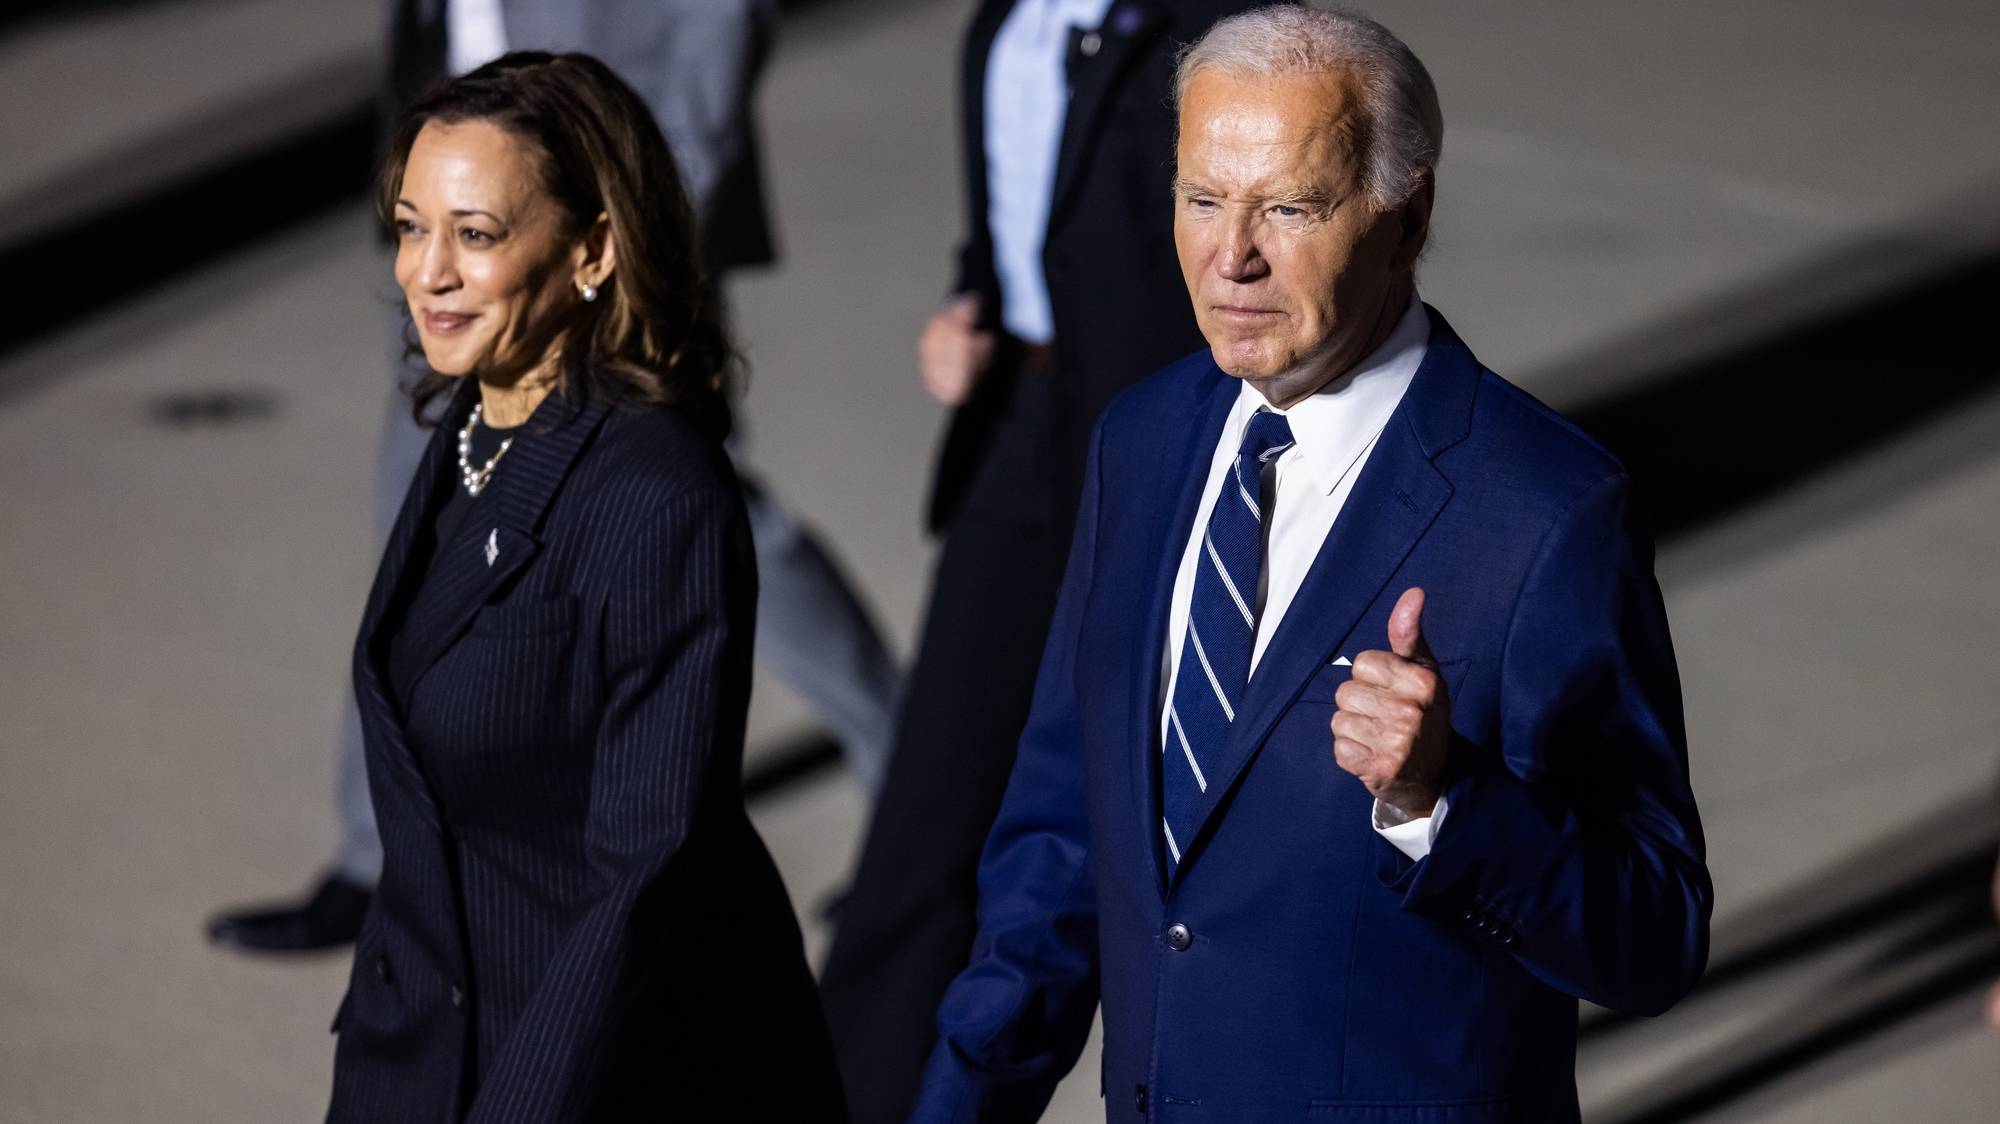 epa11517494 US President Joe Biden and Vice President Kamala Harris depart after a greeting event for Russian-American journalist Alsu Kurmasheva, Wall Street Journal reporter Evan Gershkovich, and former US Marine Paul Whelan, following their arrival in the US after a 26-person prisoner swap between Russia, the US and five other countries, at Andrews Air Base, Maryland, USA, 01 August 2024. The exchange includes at least two dozen people, and is the biggest prisoner swap between Russia and the West since the Cold War.  EPA/JIM LO SCALZO